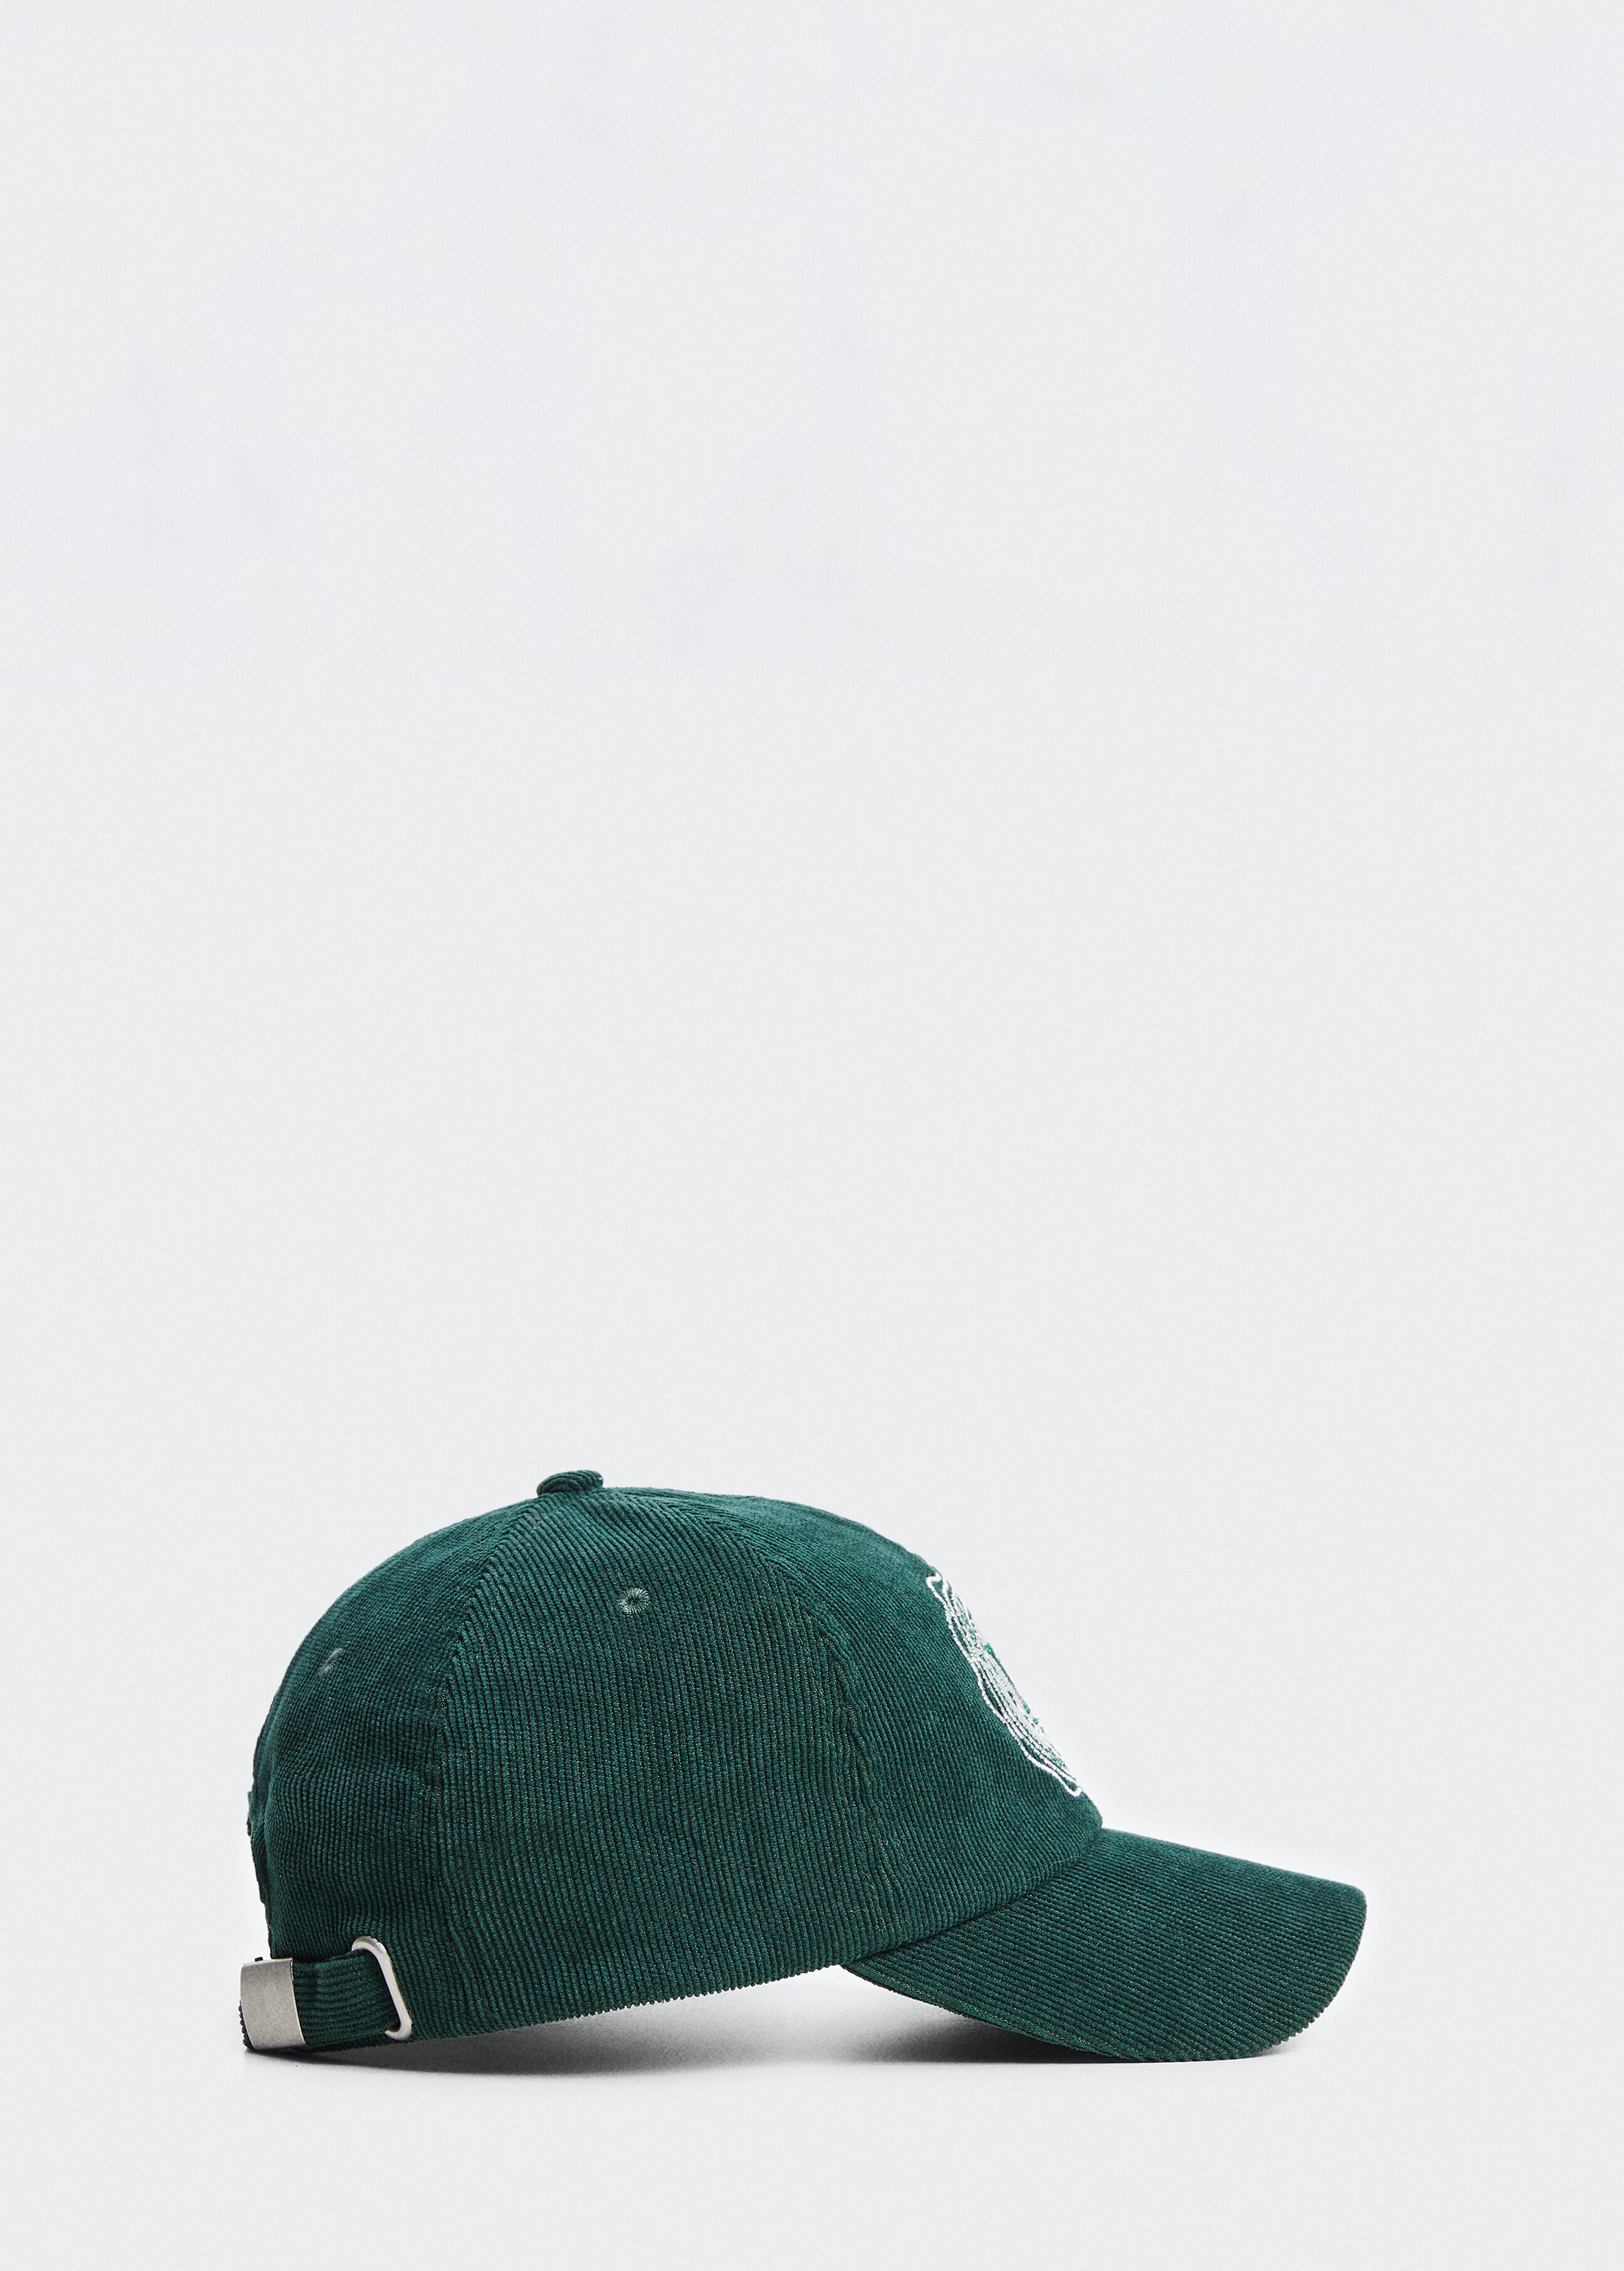 Embroidered corduroy cap - Article without model